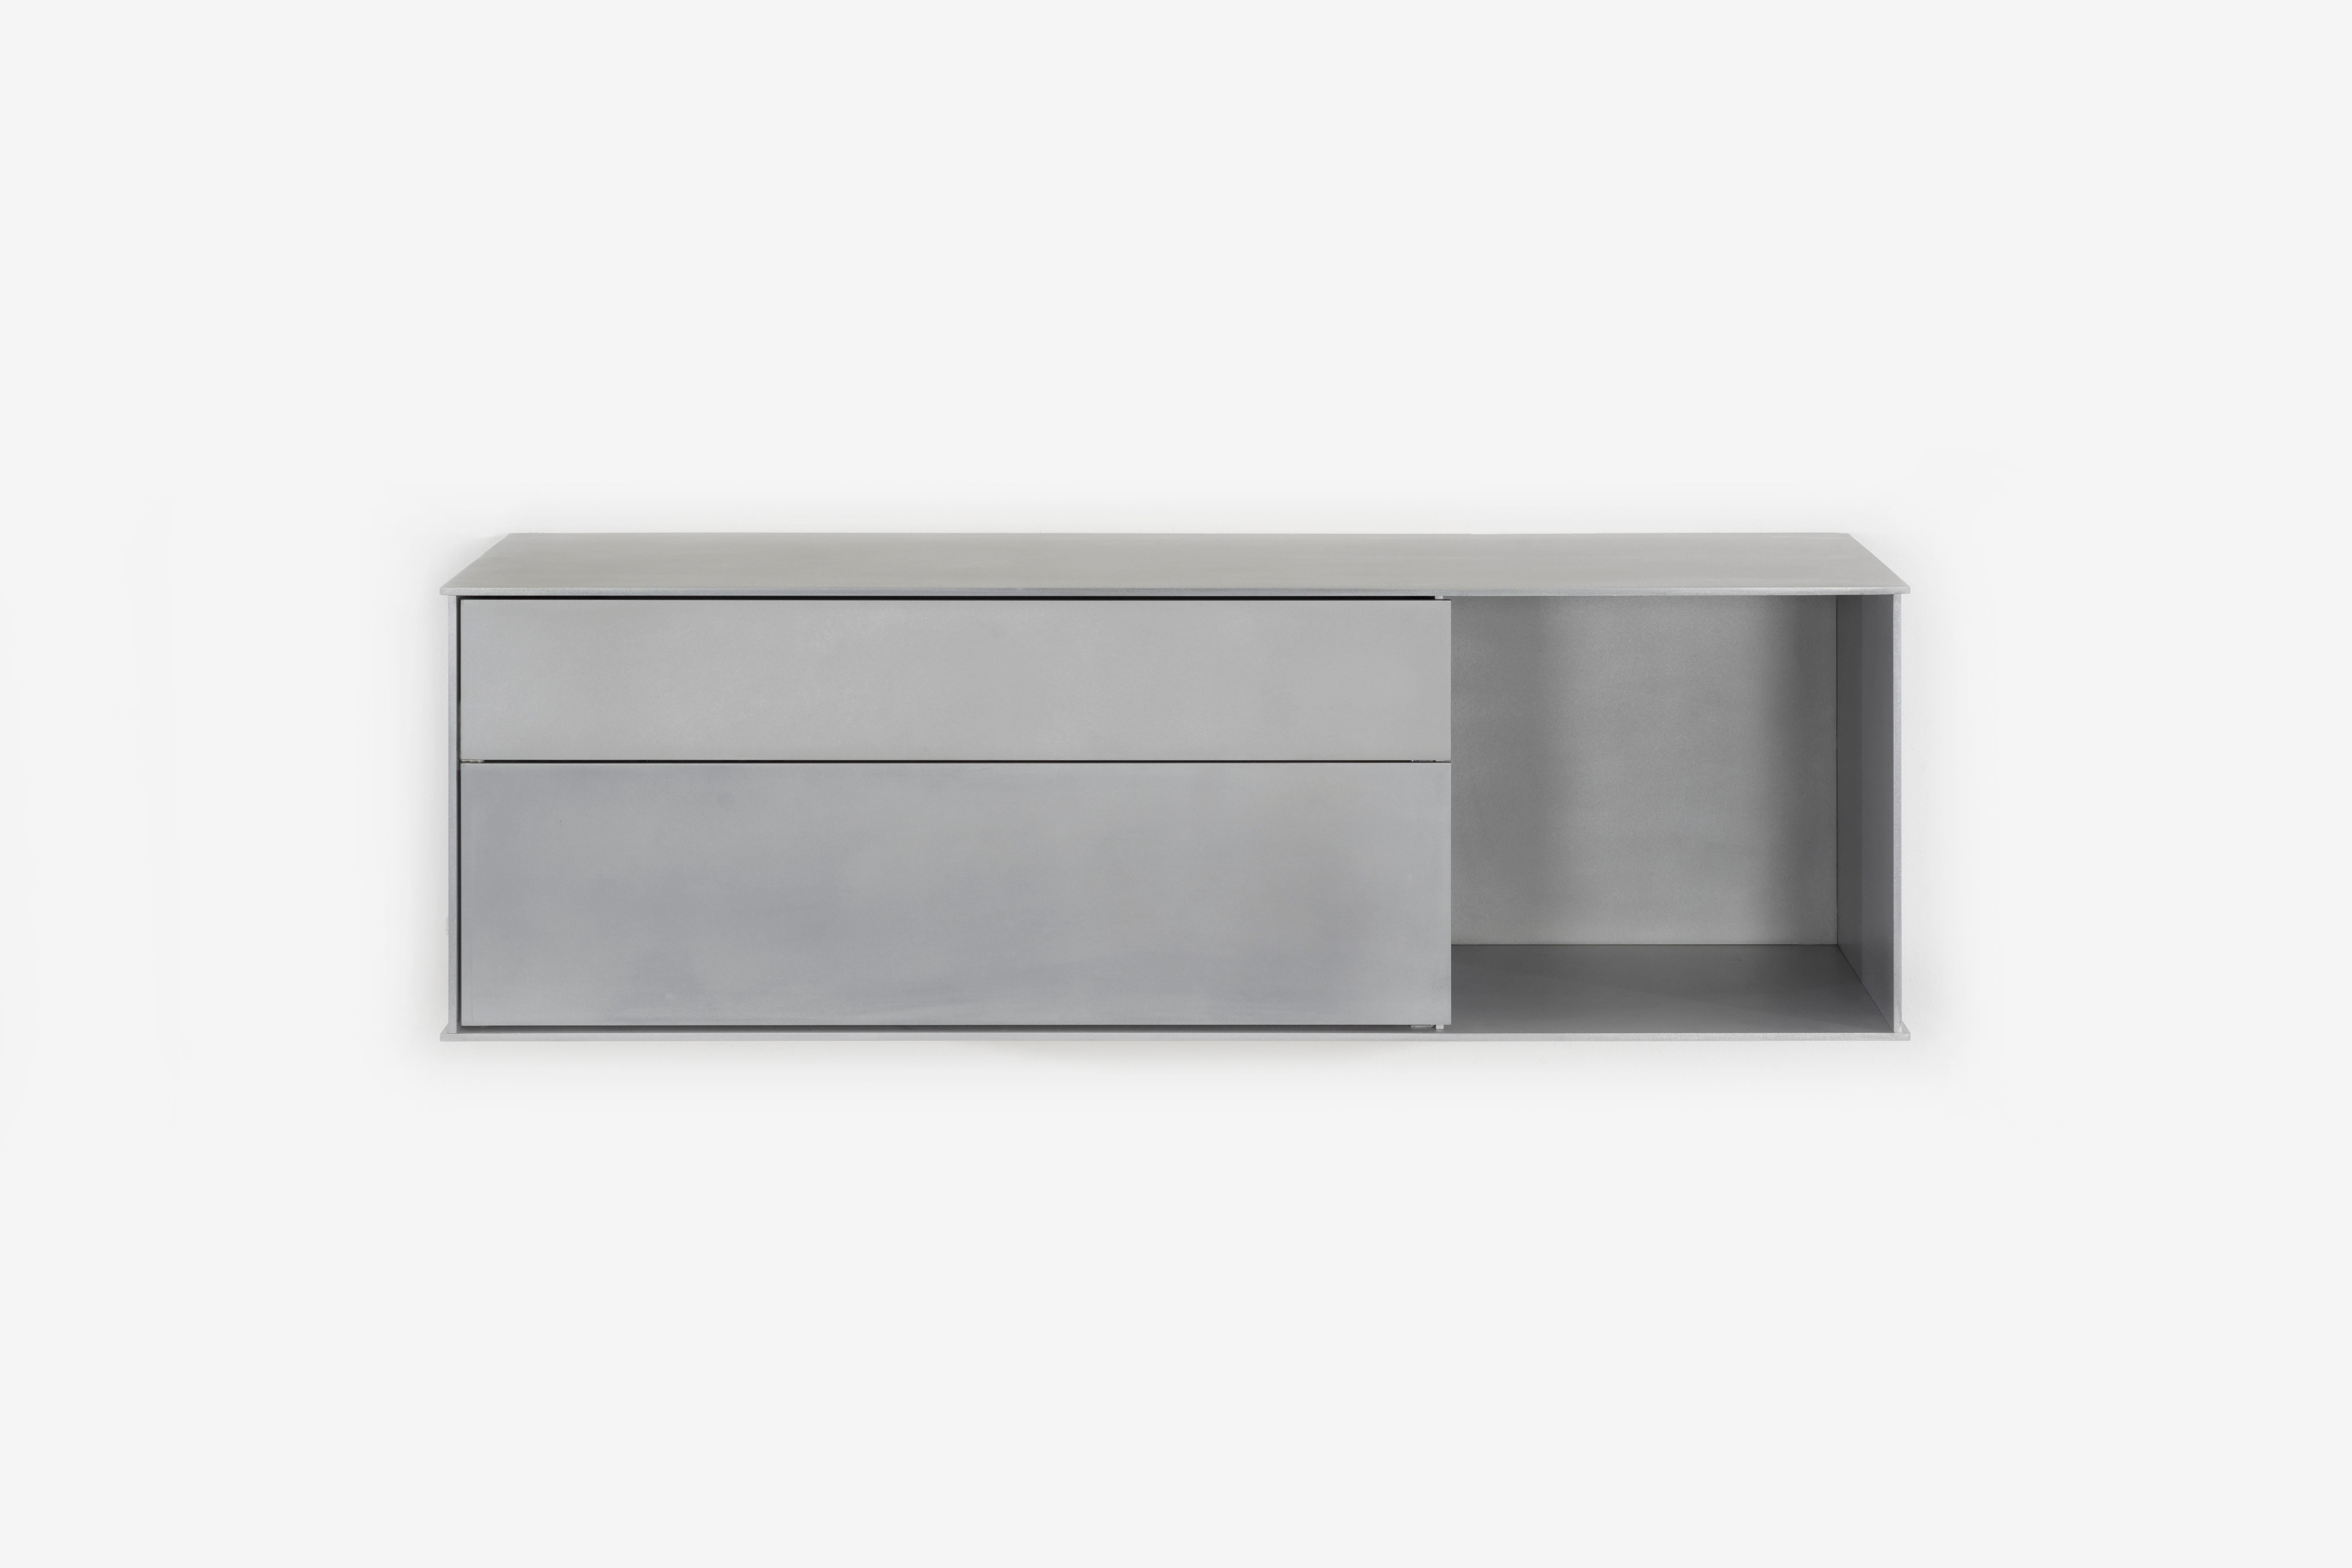 Minimalist OG Wall-Mounted Shelf with Drawers in Waxed Aluminum Plate by Jonathan Nesci For Sale